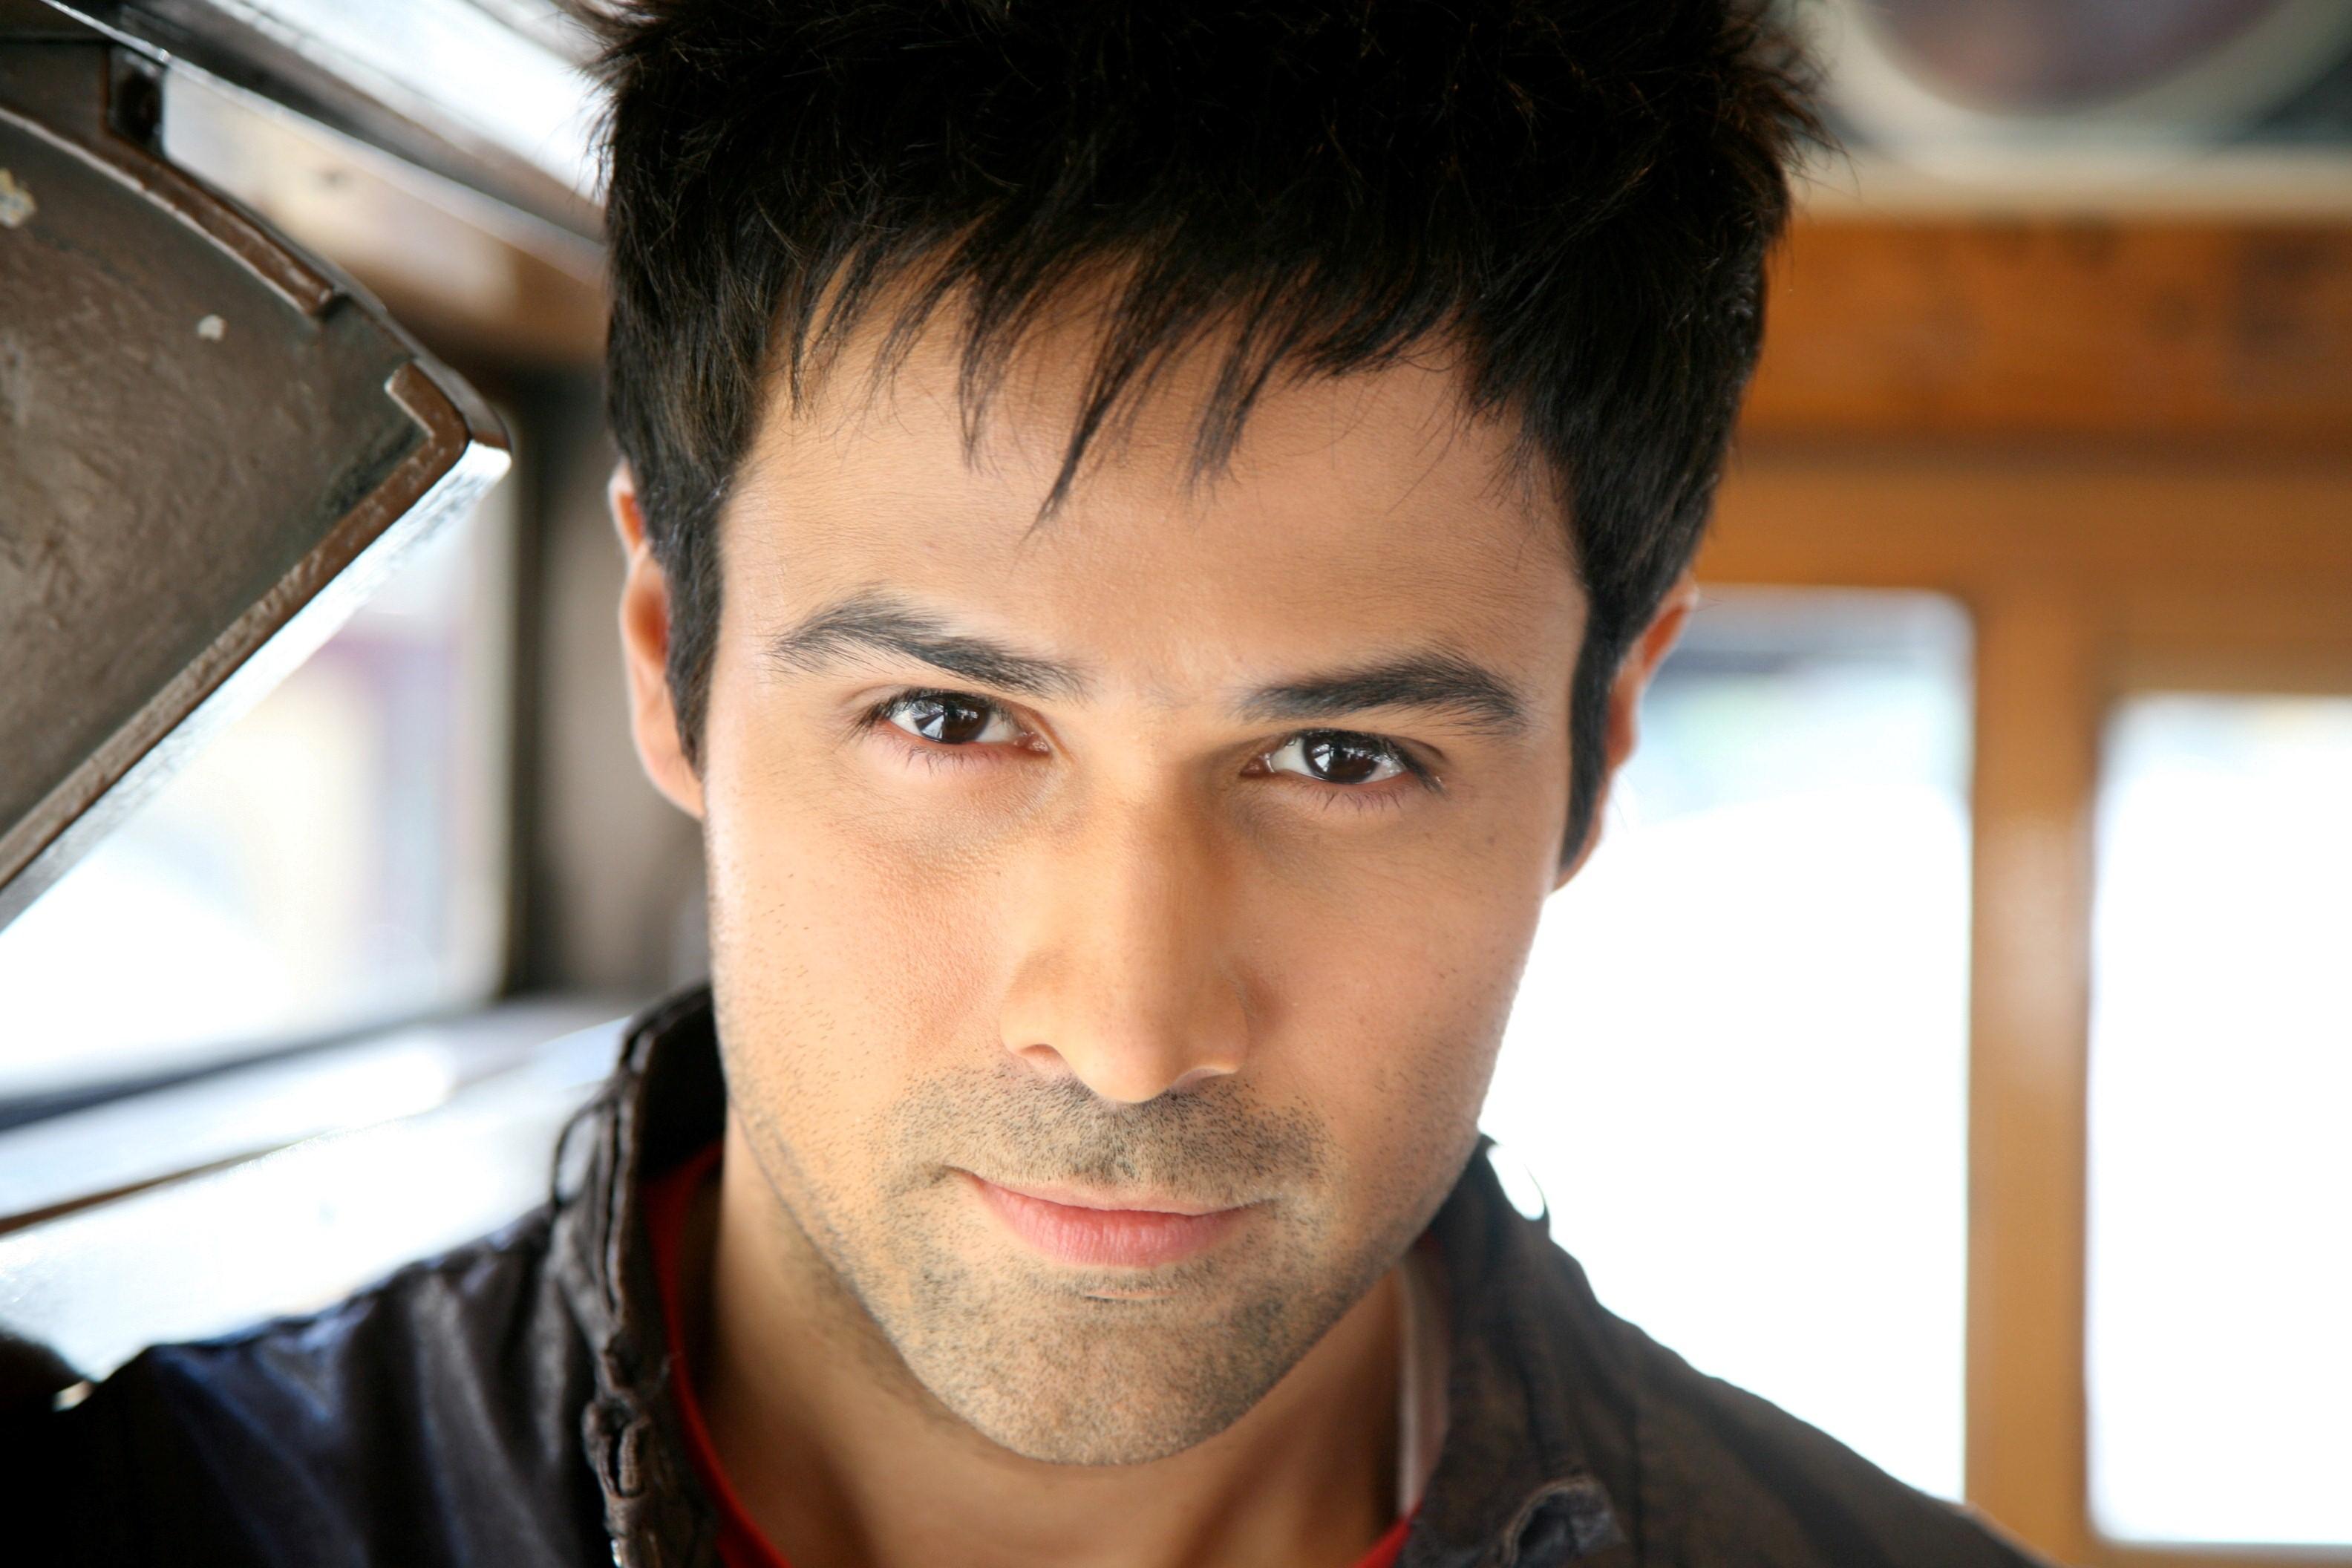 Emraan Hashmi Wallpapers Wallpaper Cave See photos, profile pictures and albums from emraan hashmi. emraan hashmi wallpapers wallpaper cave